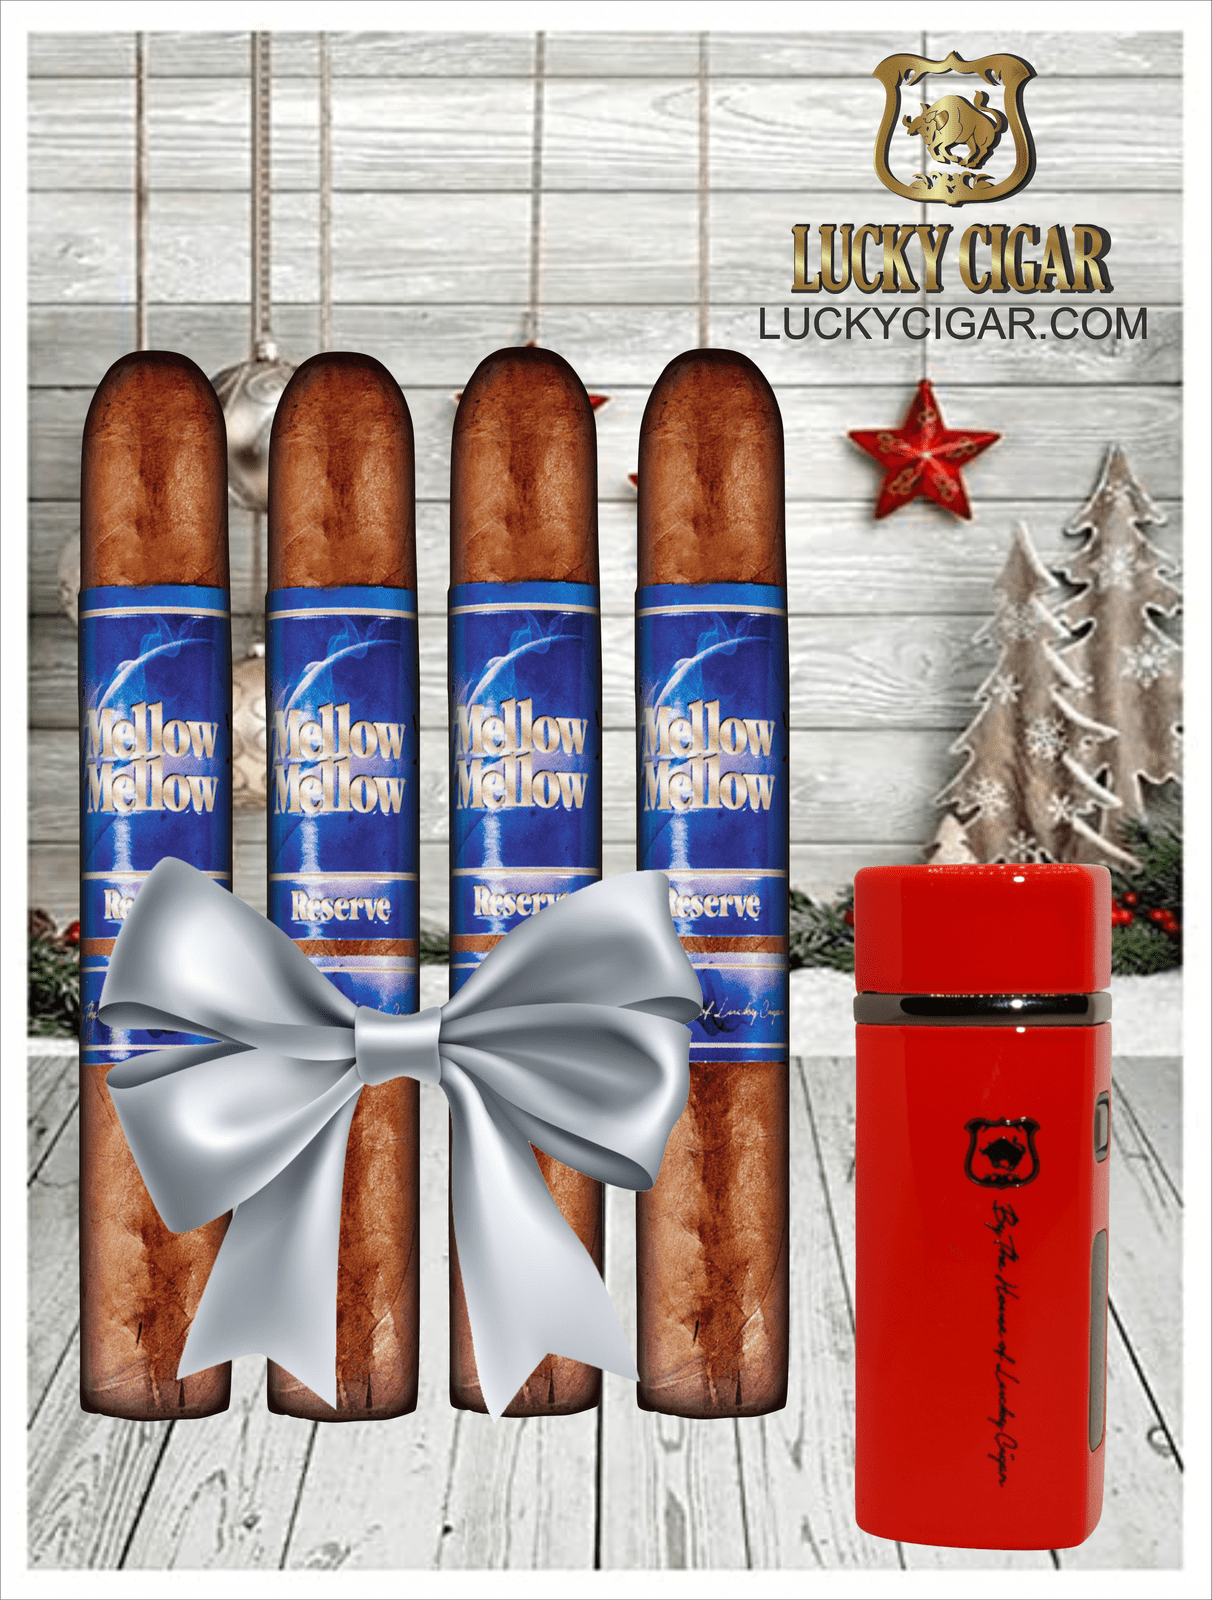 Cigar Gift Sets: Set of 4 Cigars, 4 Mellow Mellow Reserve with Torch